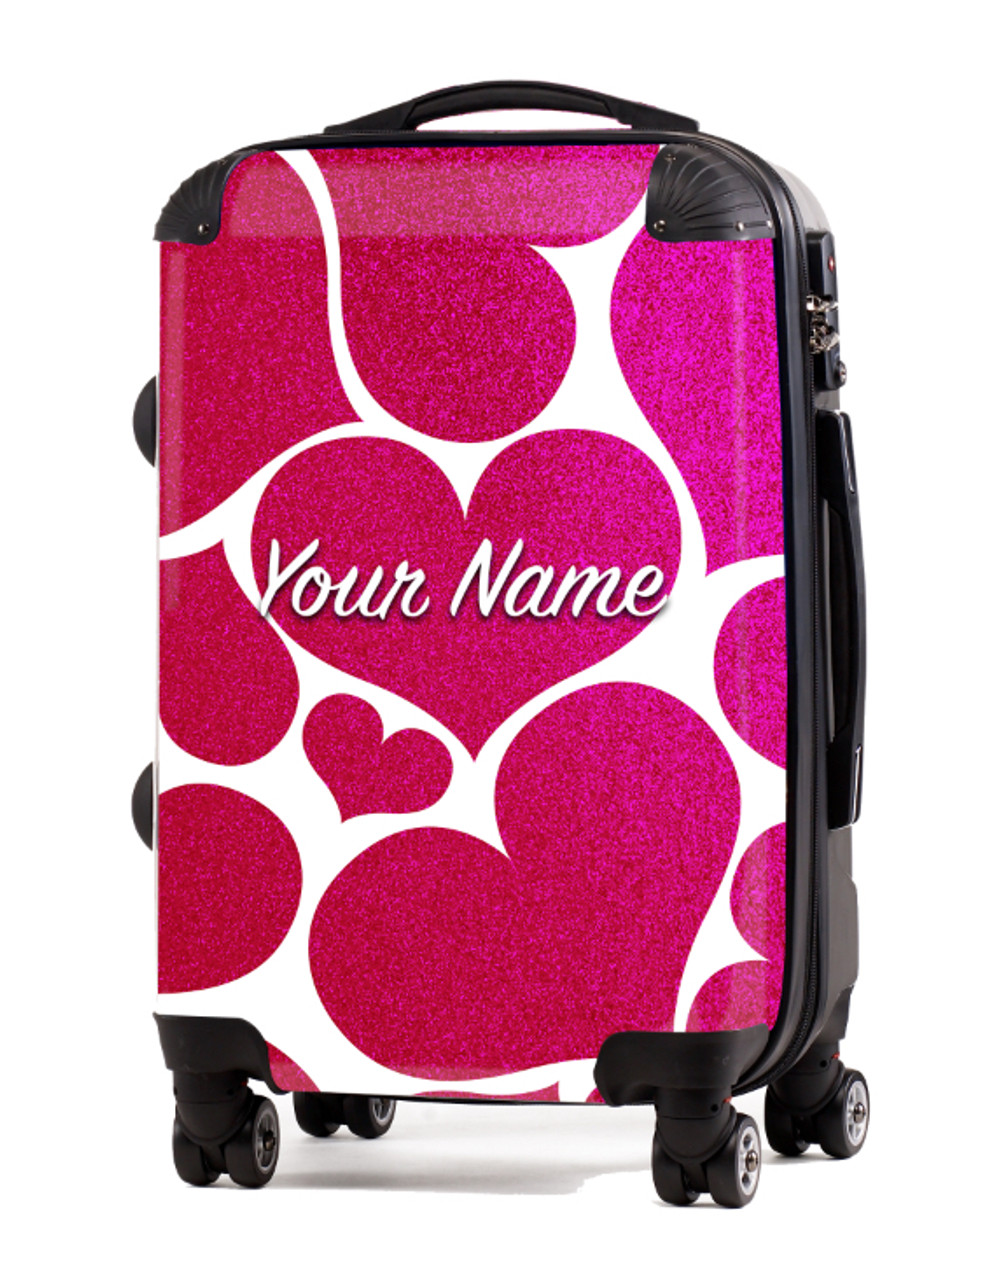 Cheer Luggage | Personalized Luggage - Pink-Glitter Hearts Design